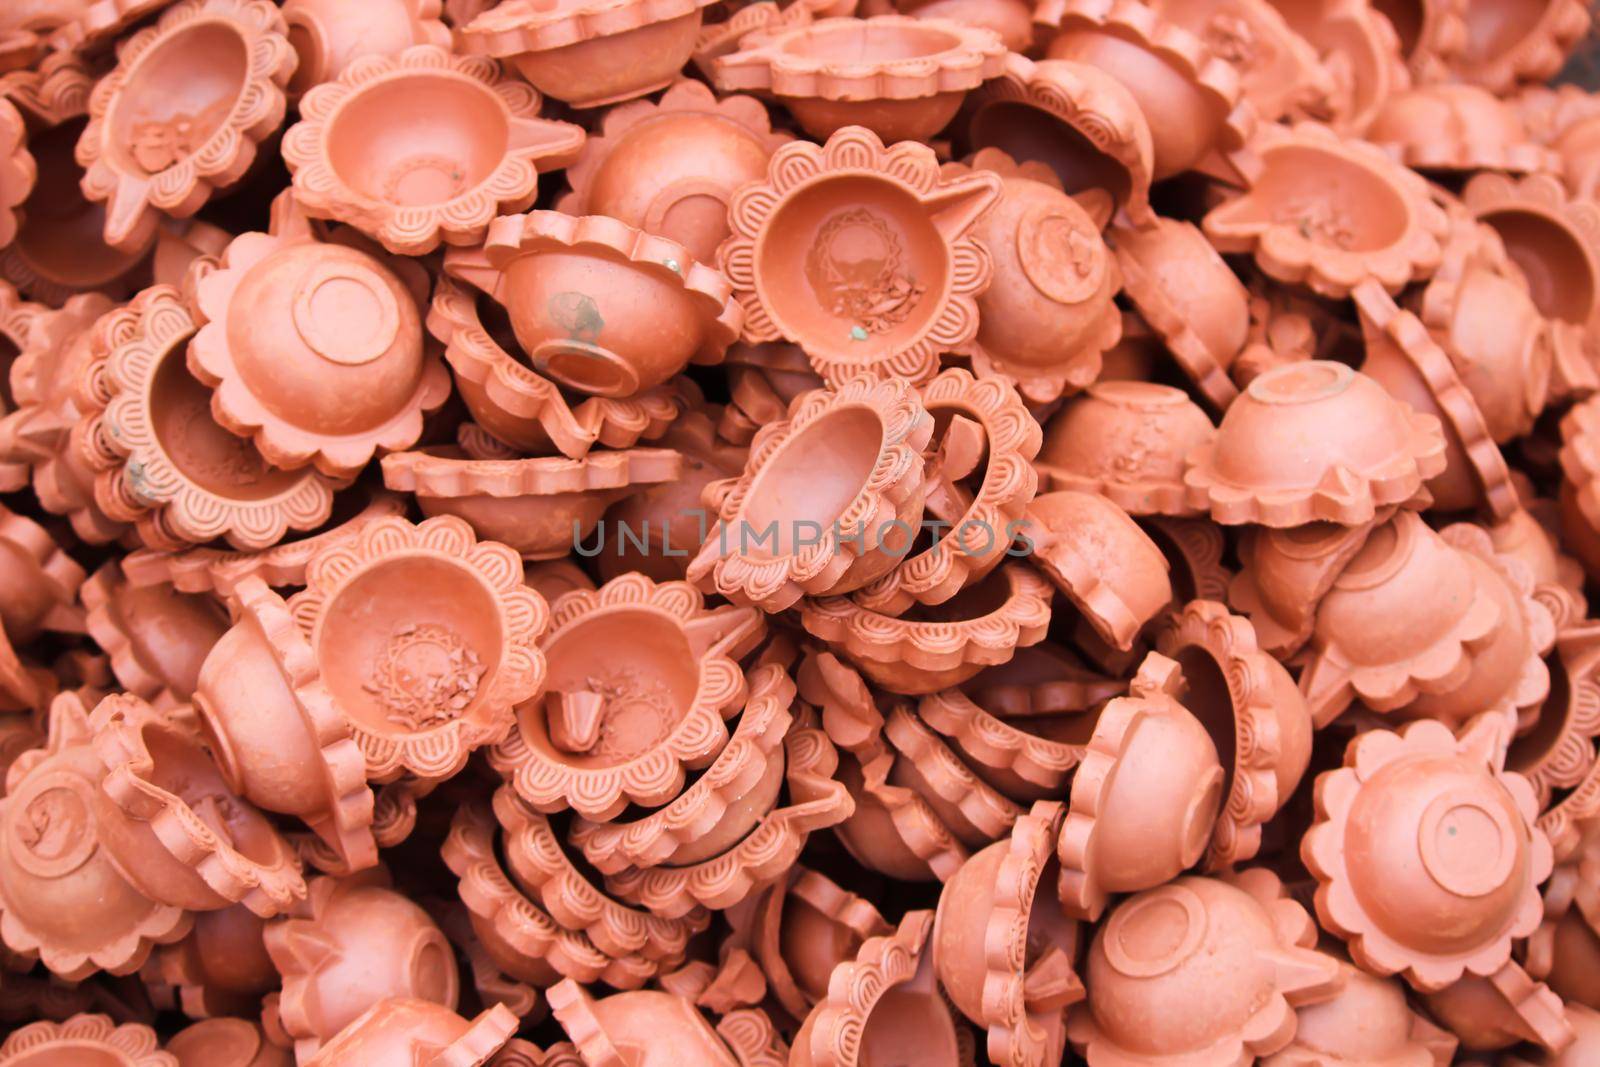 clay lamp (Diya) for sale at Market in india, diya decoration is part of Diwali Festival by tabishere